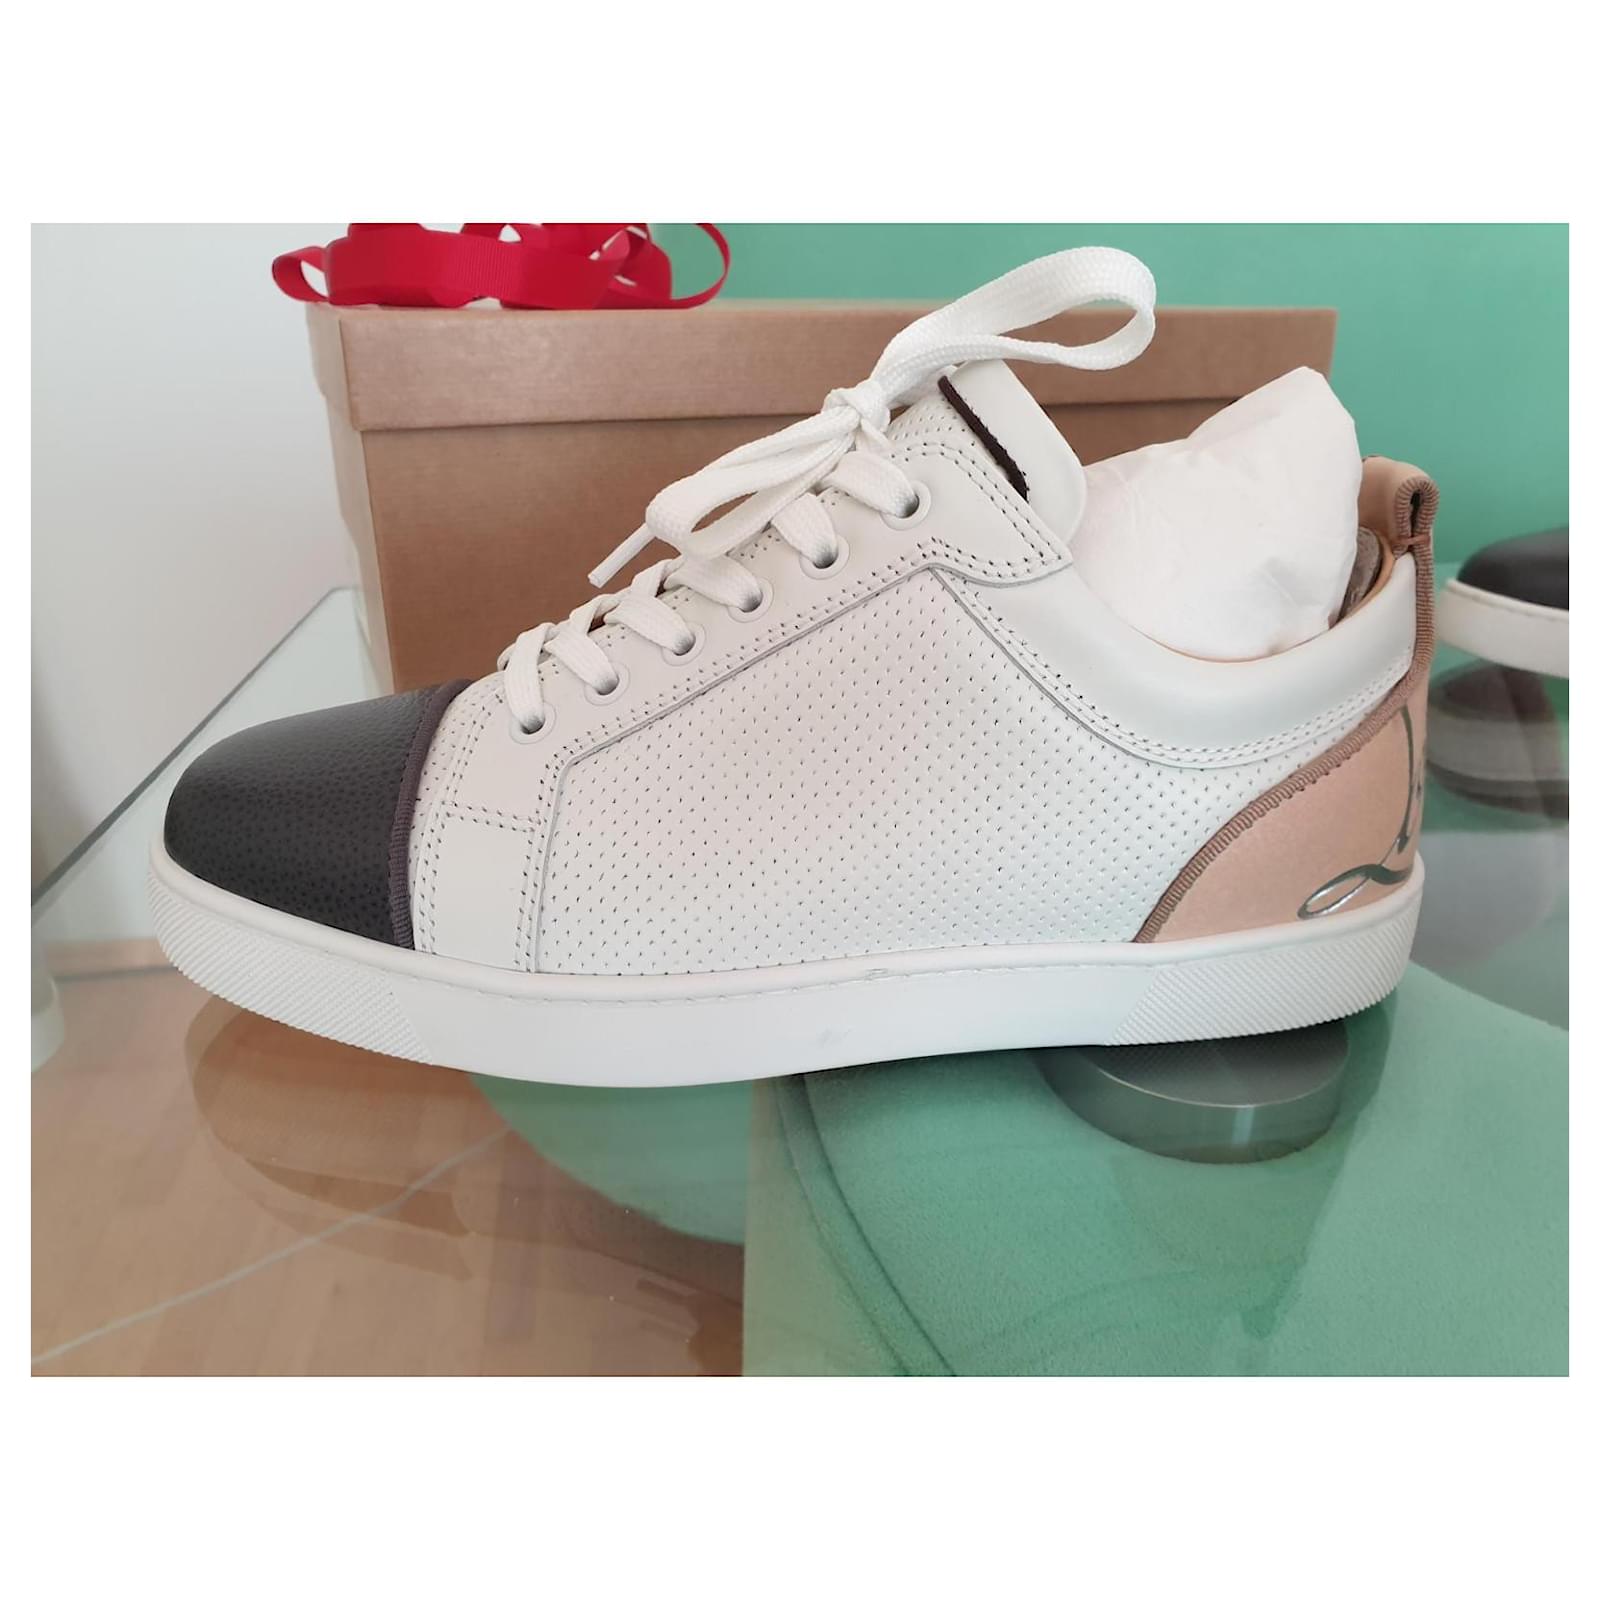 CHRISTIAN LOUBOUTIN: Christian LouboutinFun Louis Junior sneakers in  leather - White